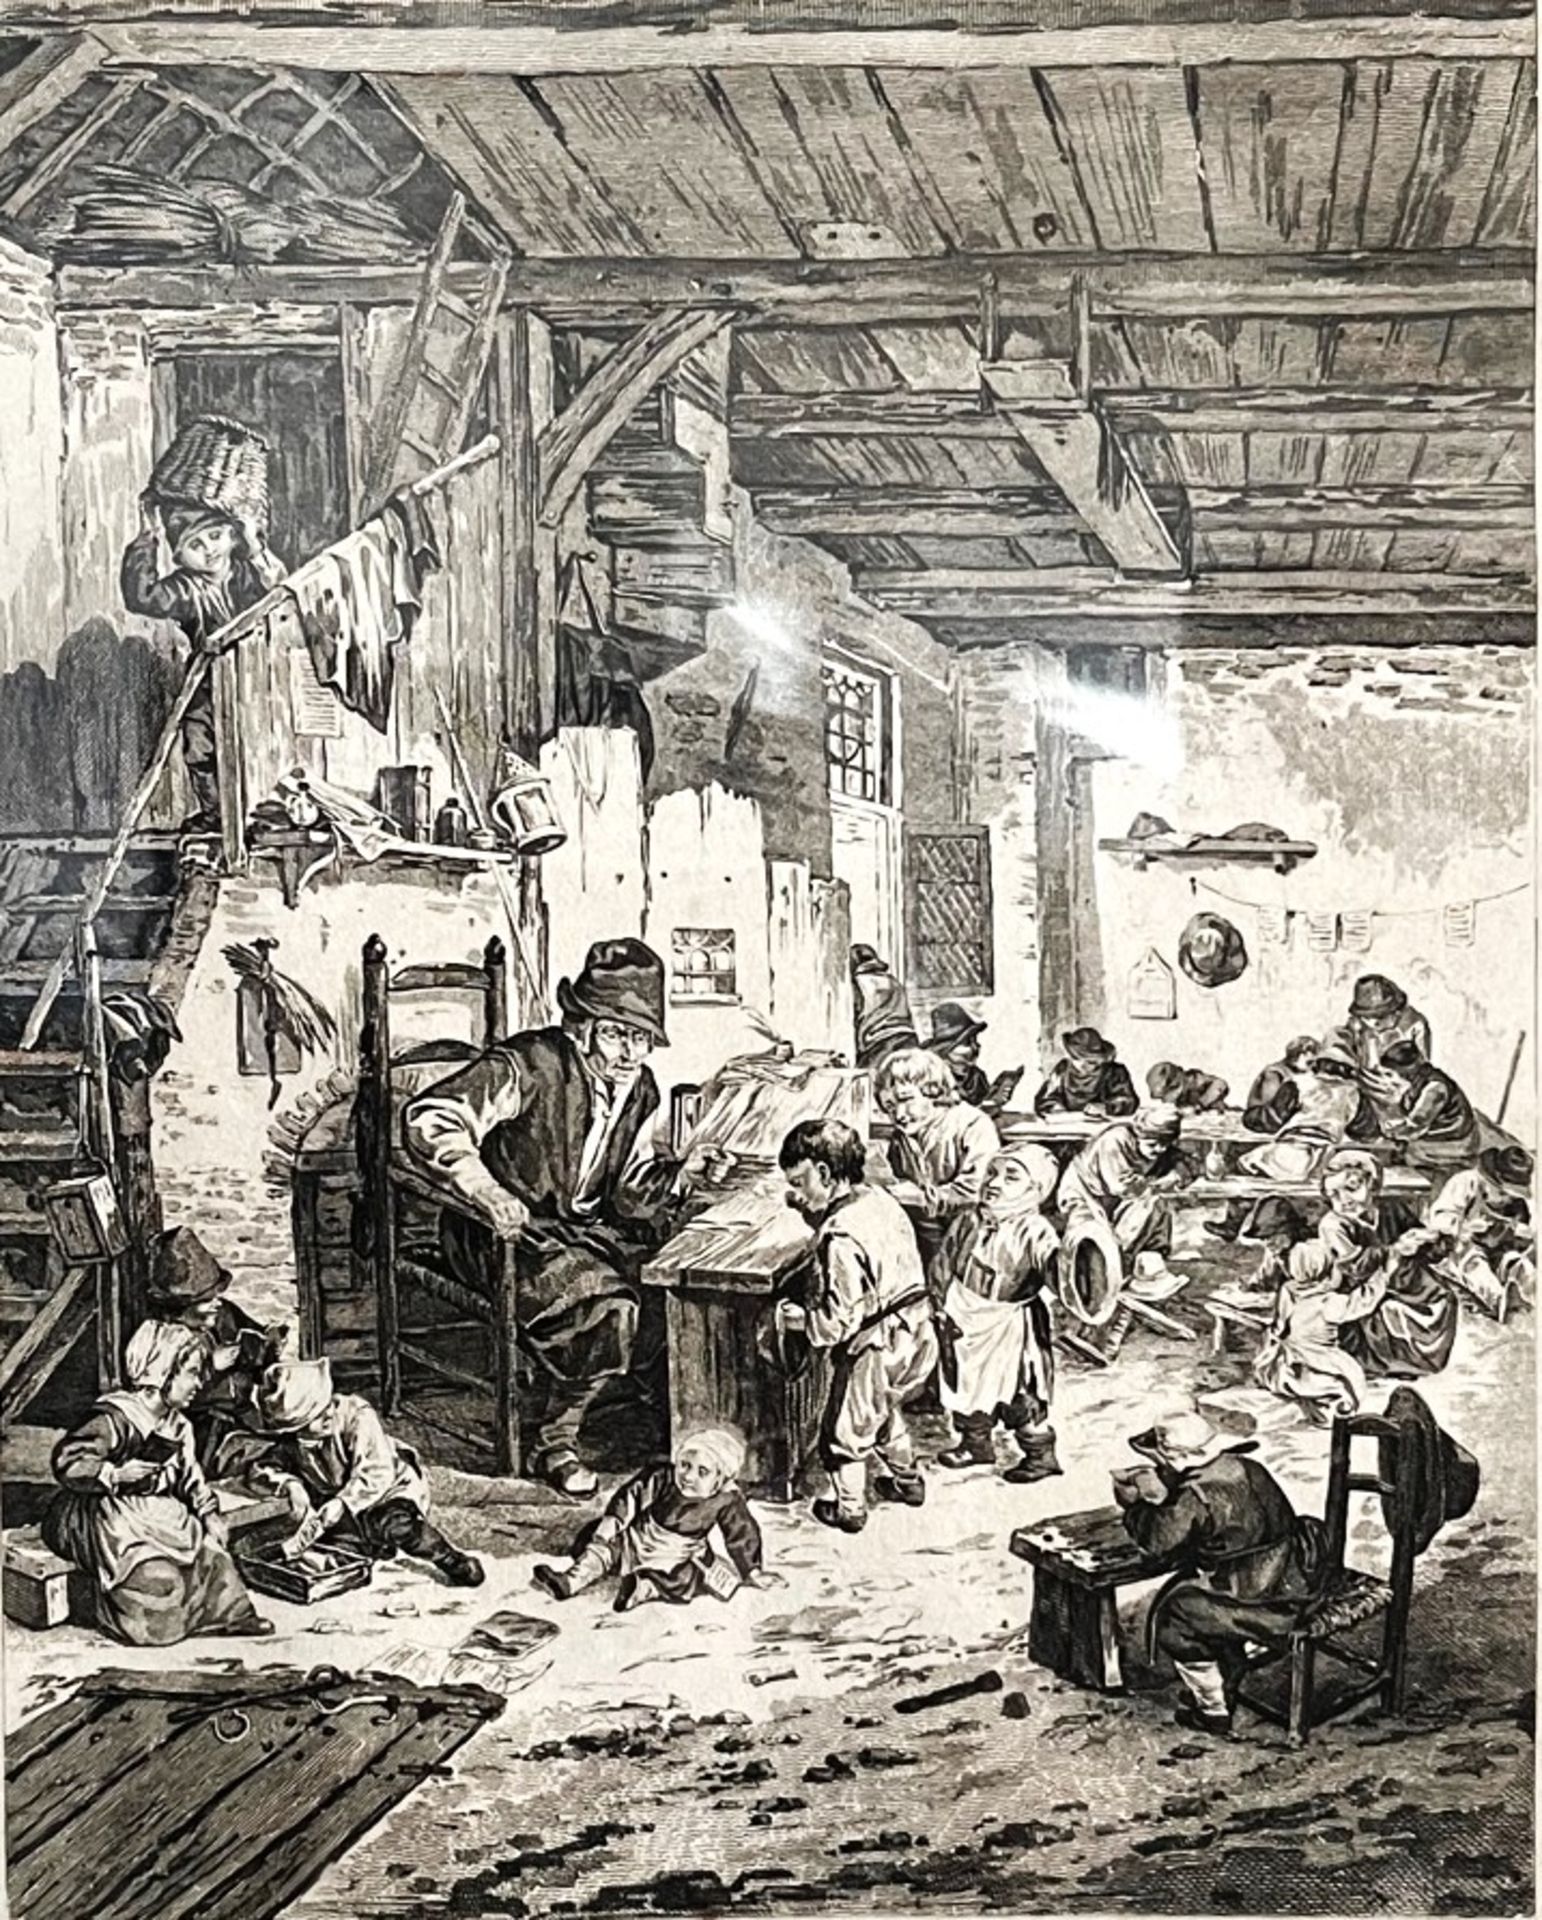 Lithograph " In der Schule" second half of the 19th century, German